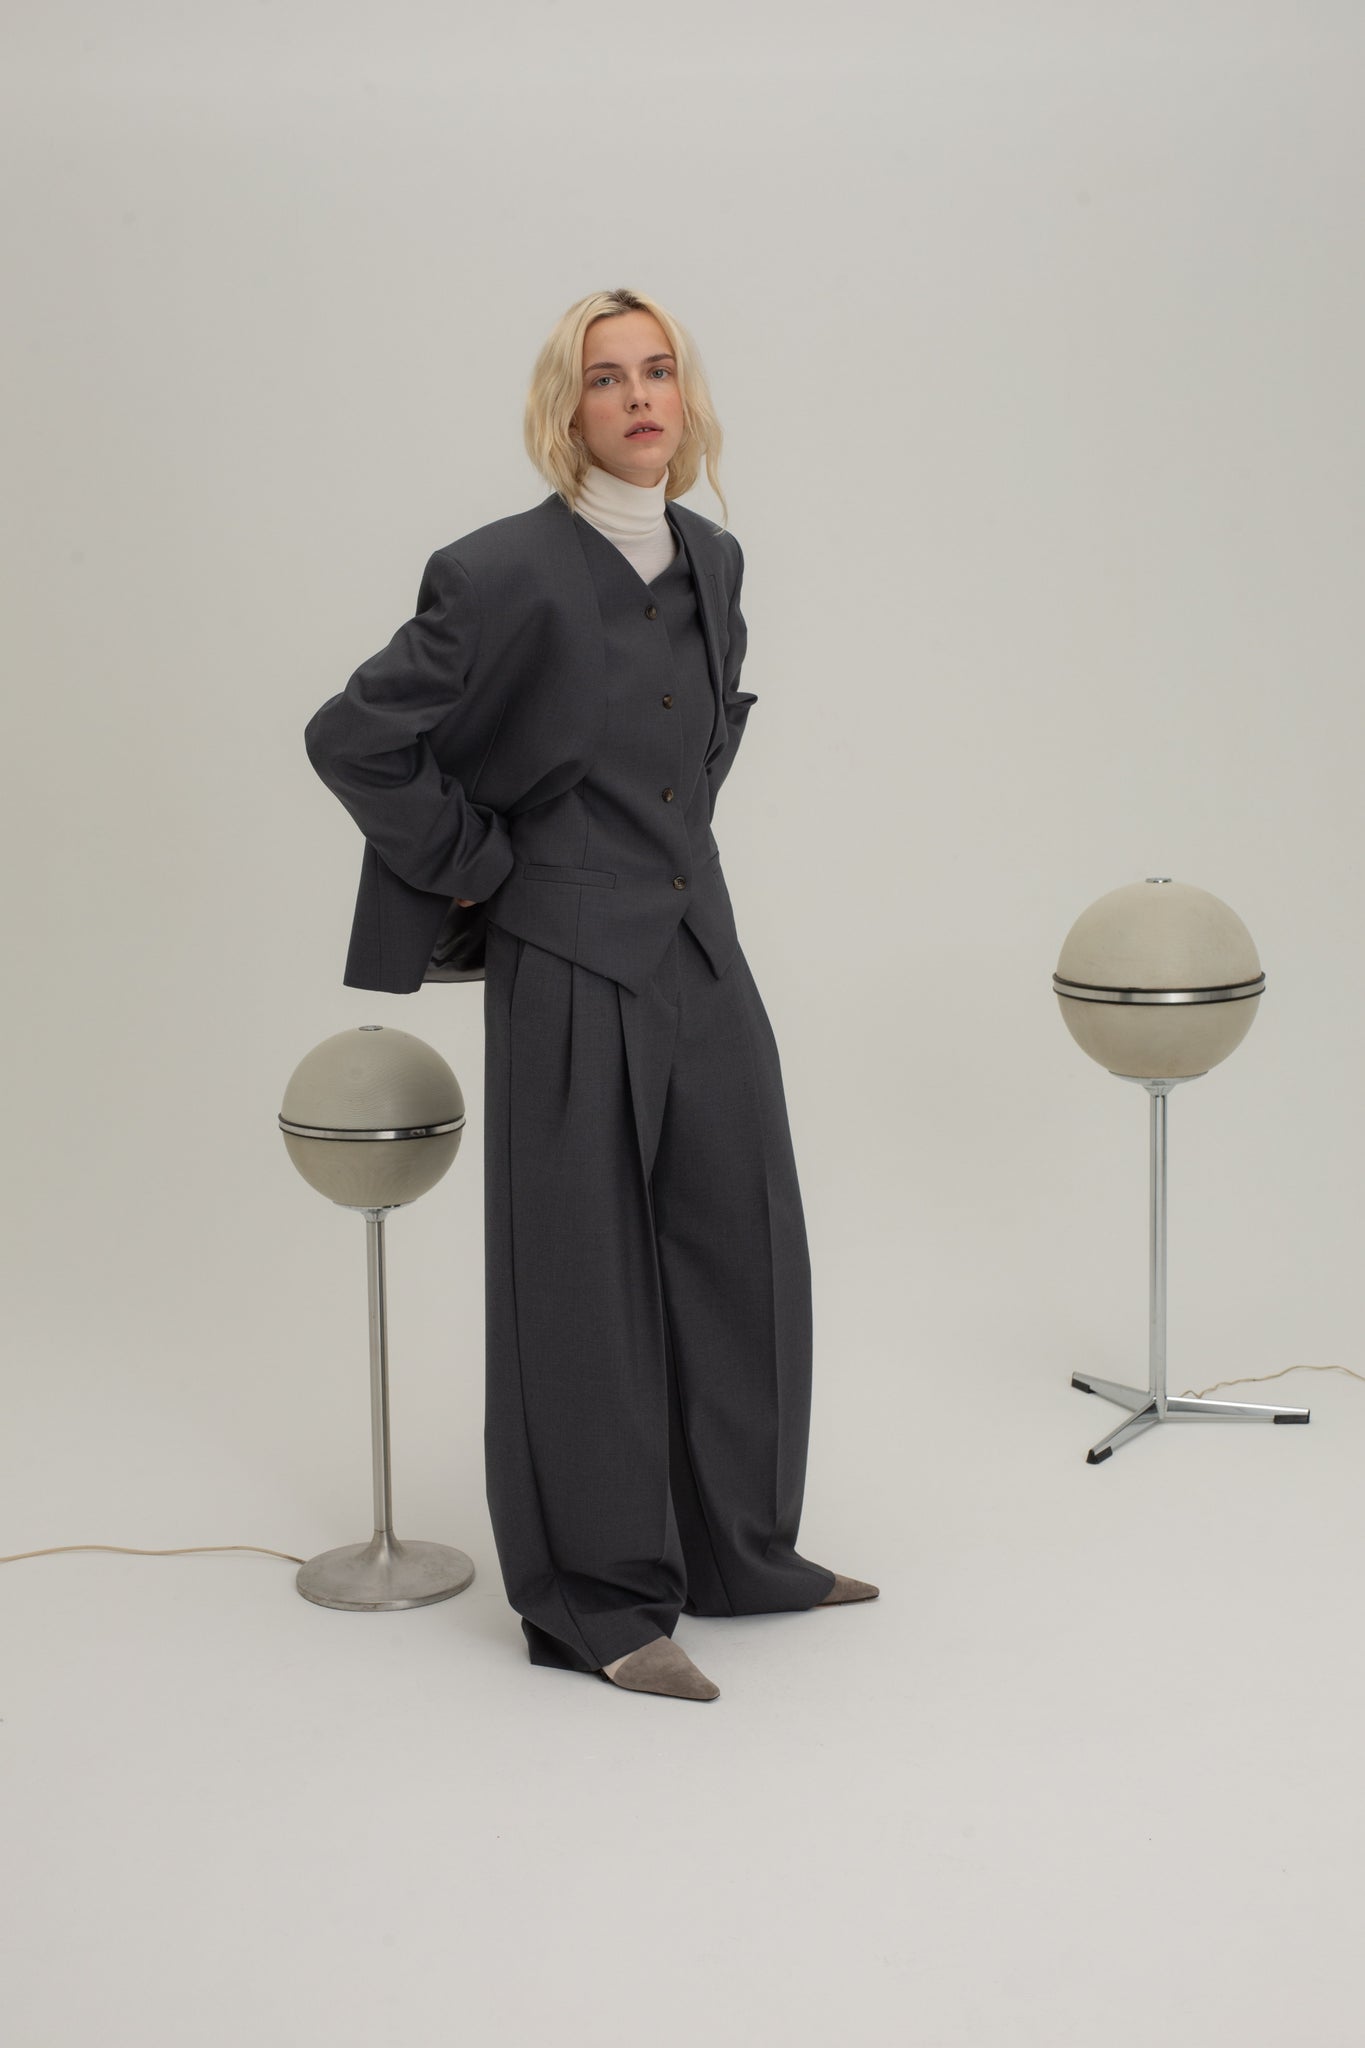 PLEATED WIDE SUIT TROUSERS IN GREY